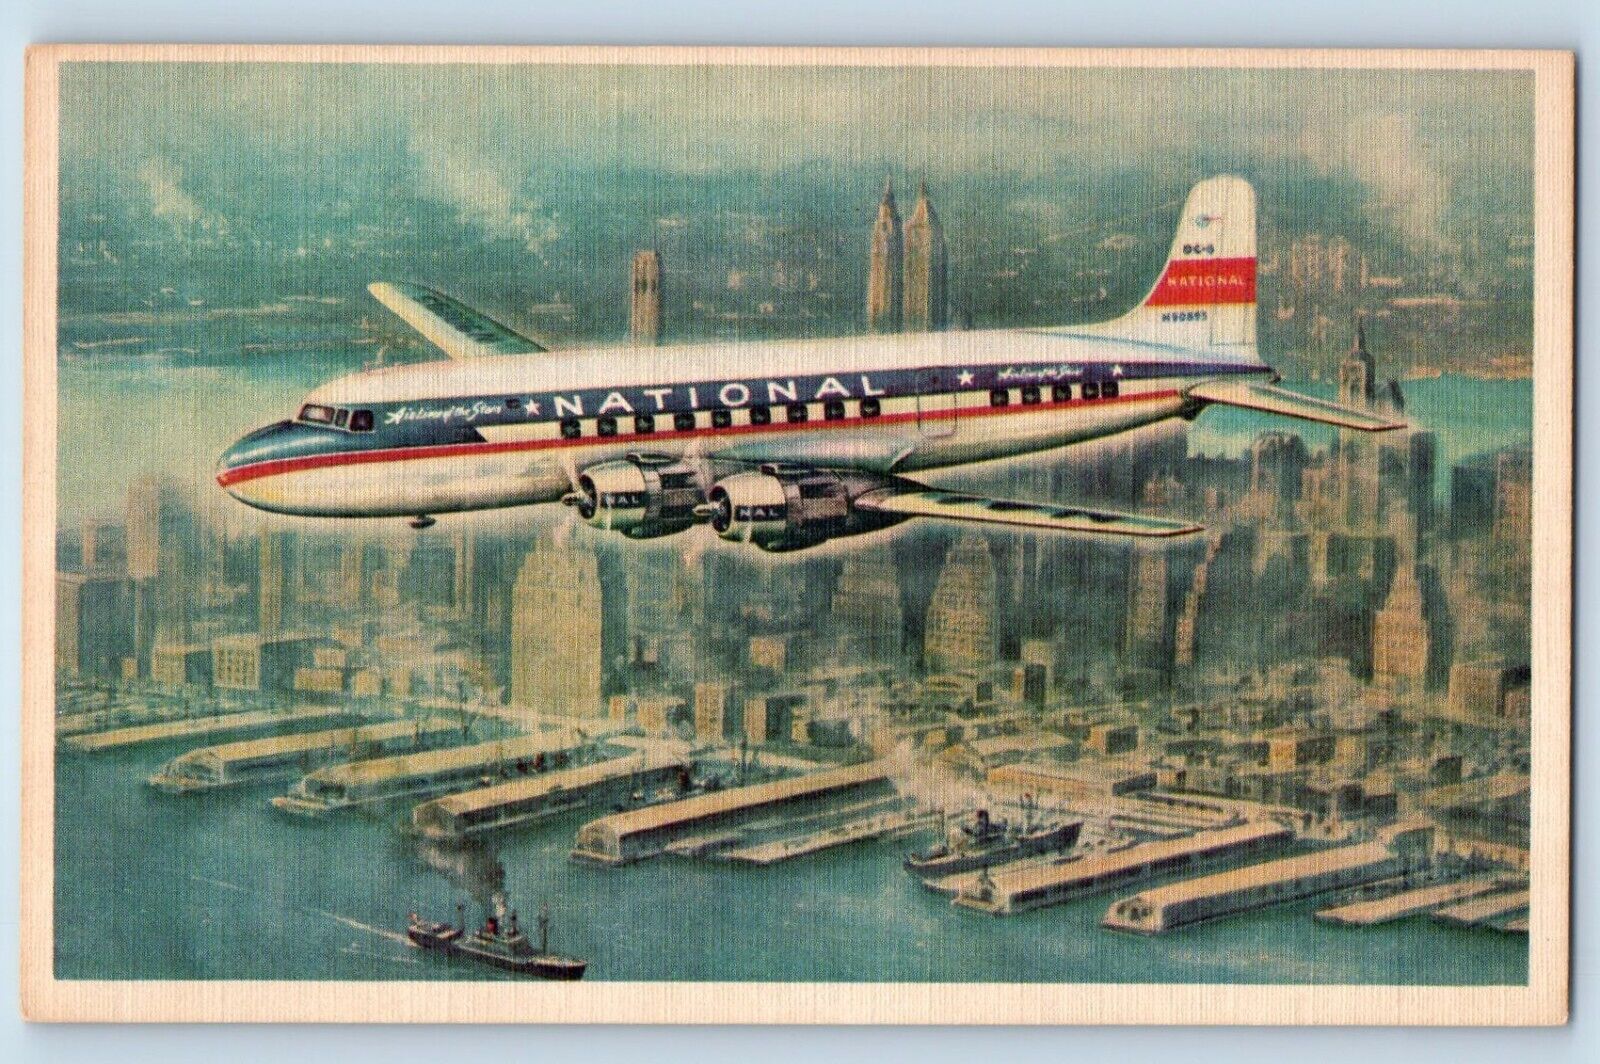 The Star Postcard Airplane National World Famed Luxury Red Carpet Service